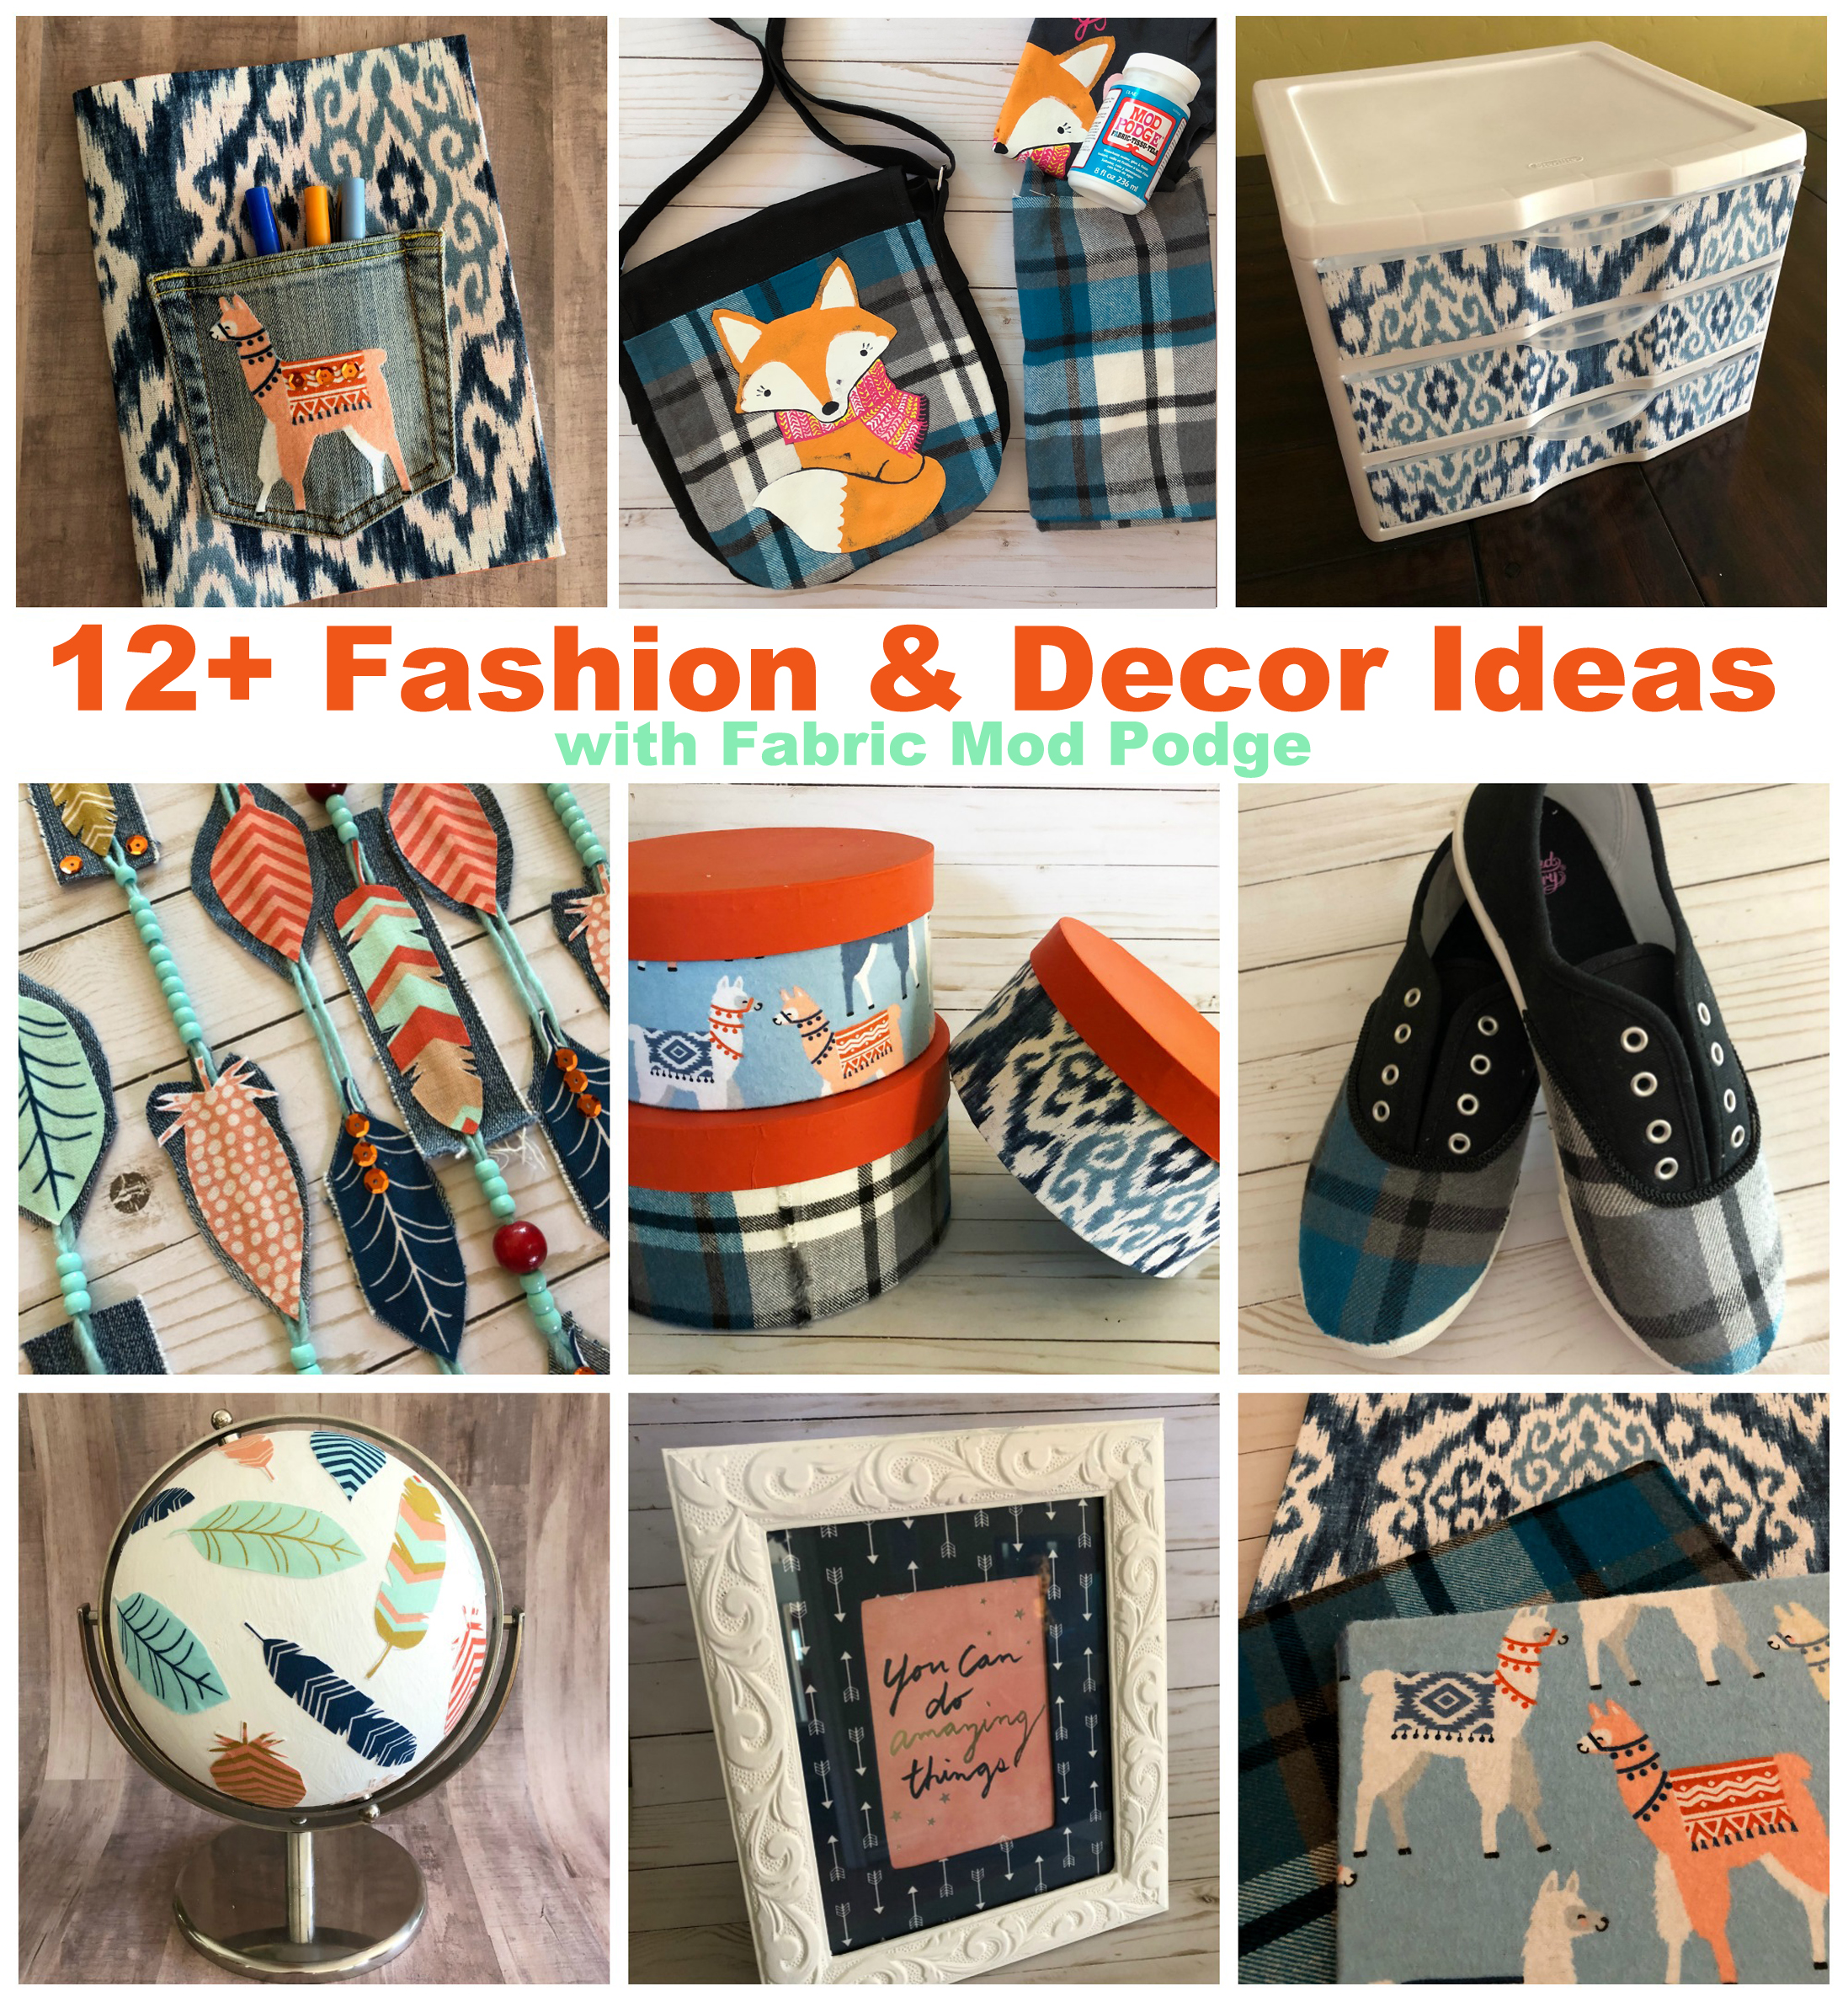 12+ Fabric Mod Podge Projects for Back to School Fashion and Dorm Decor -  CATHIE FILIAN's Handmade Happy Hour